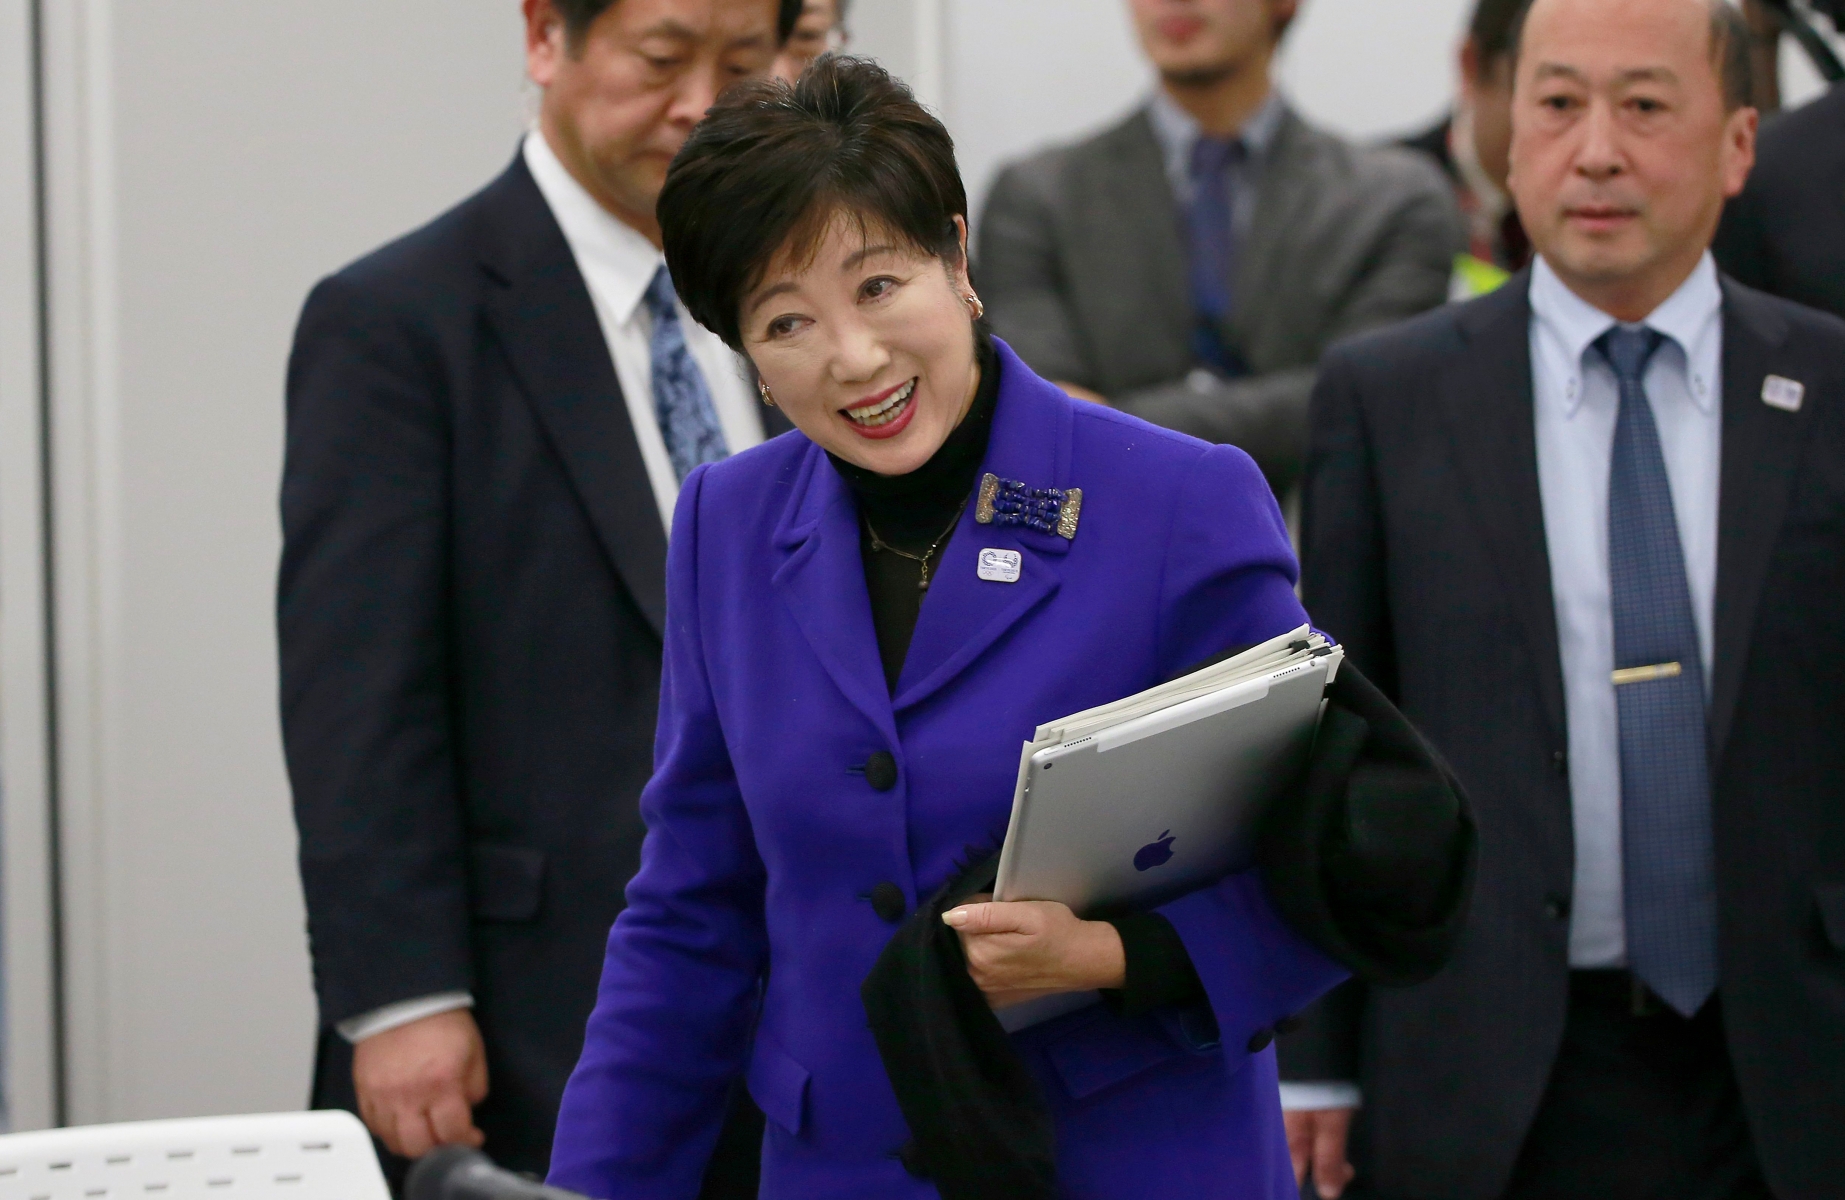 Tokyo Gov. Yuriko Koike arrives at the Four-Party Working Group meeting in Tokyo, Wednesday, Dec. 21, 2016. Japanese Olympic organizers presented their first official cost estimate for the 2020 Tokyo Games at a level slightly below their promised 2 trillion ($17 billion) cap. (AP Photo/Shizuo Kambayashi) Japan Olympics Tokyo 2020 Venues